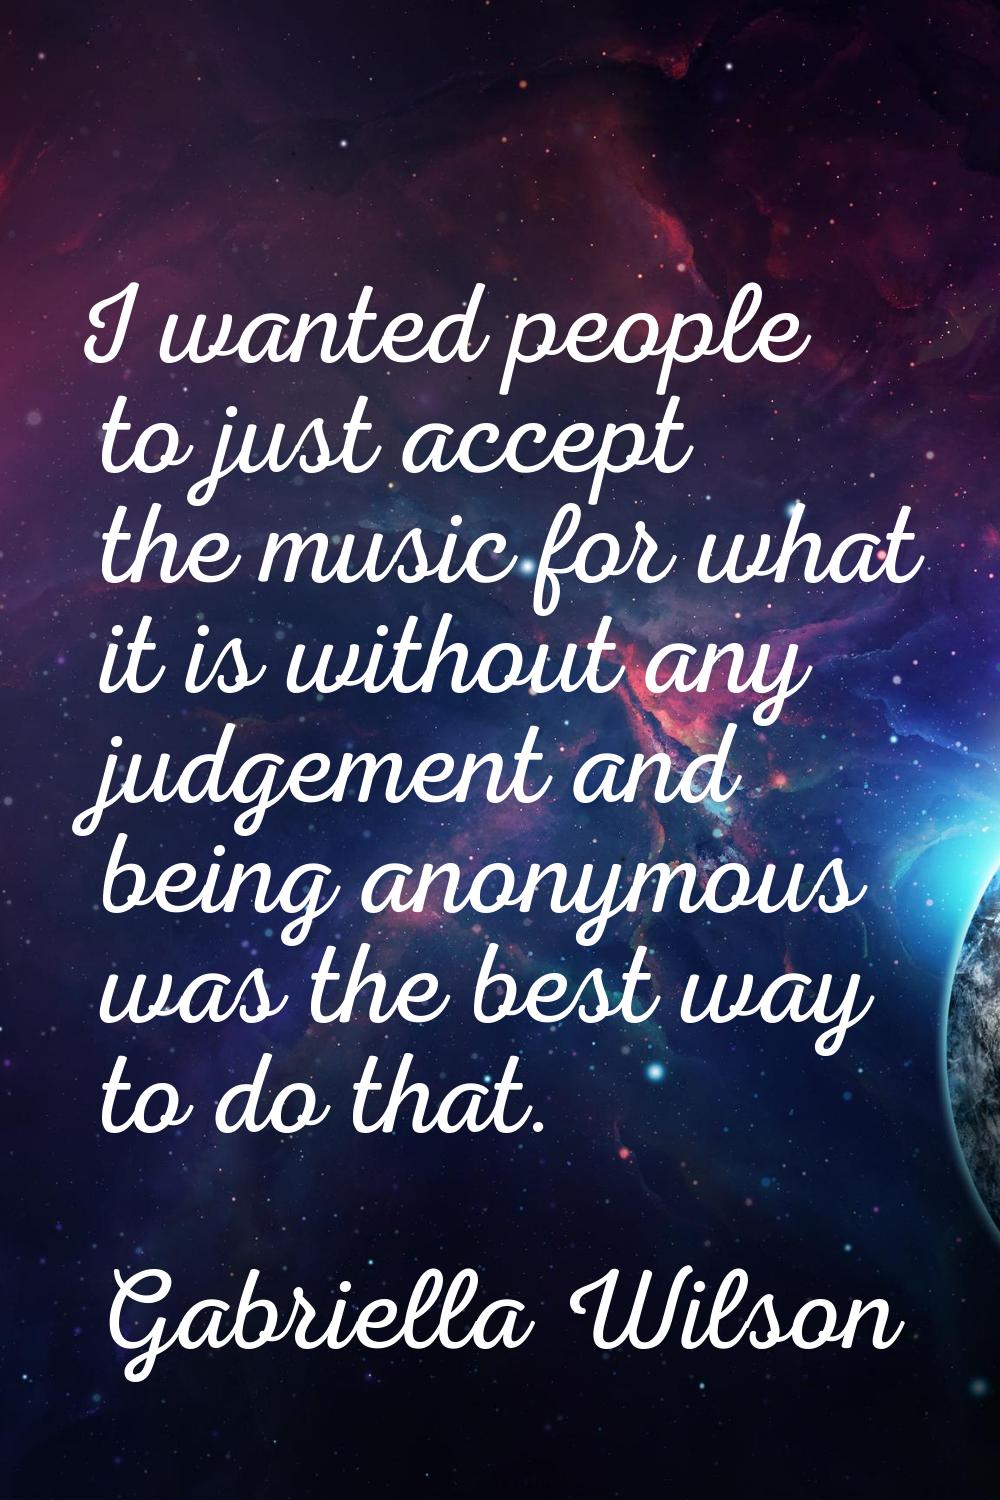 I wanted people to just accept the music for what it is without any judgement and being anonymous w